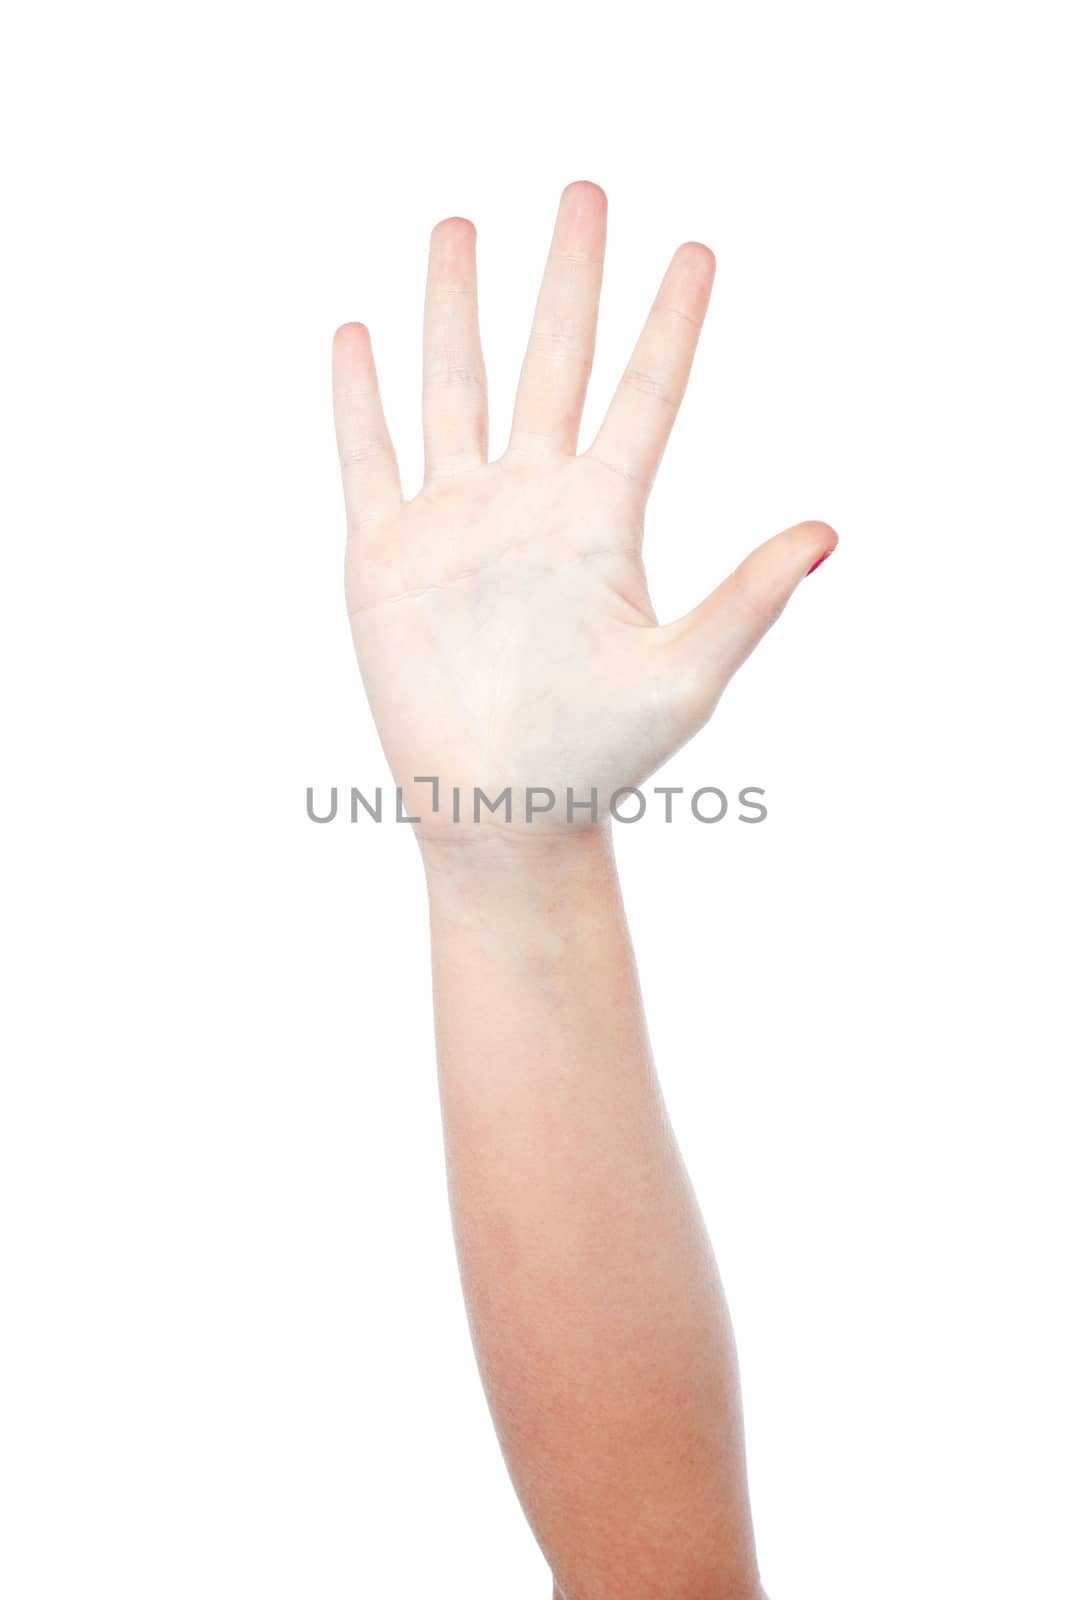 Hand showing number five, white background